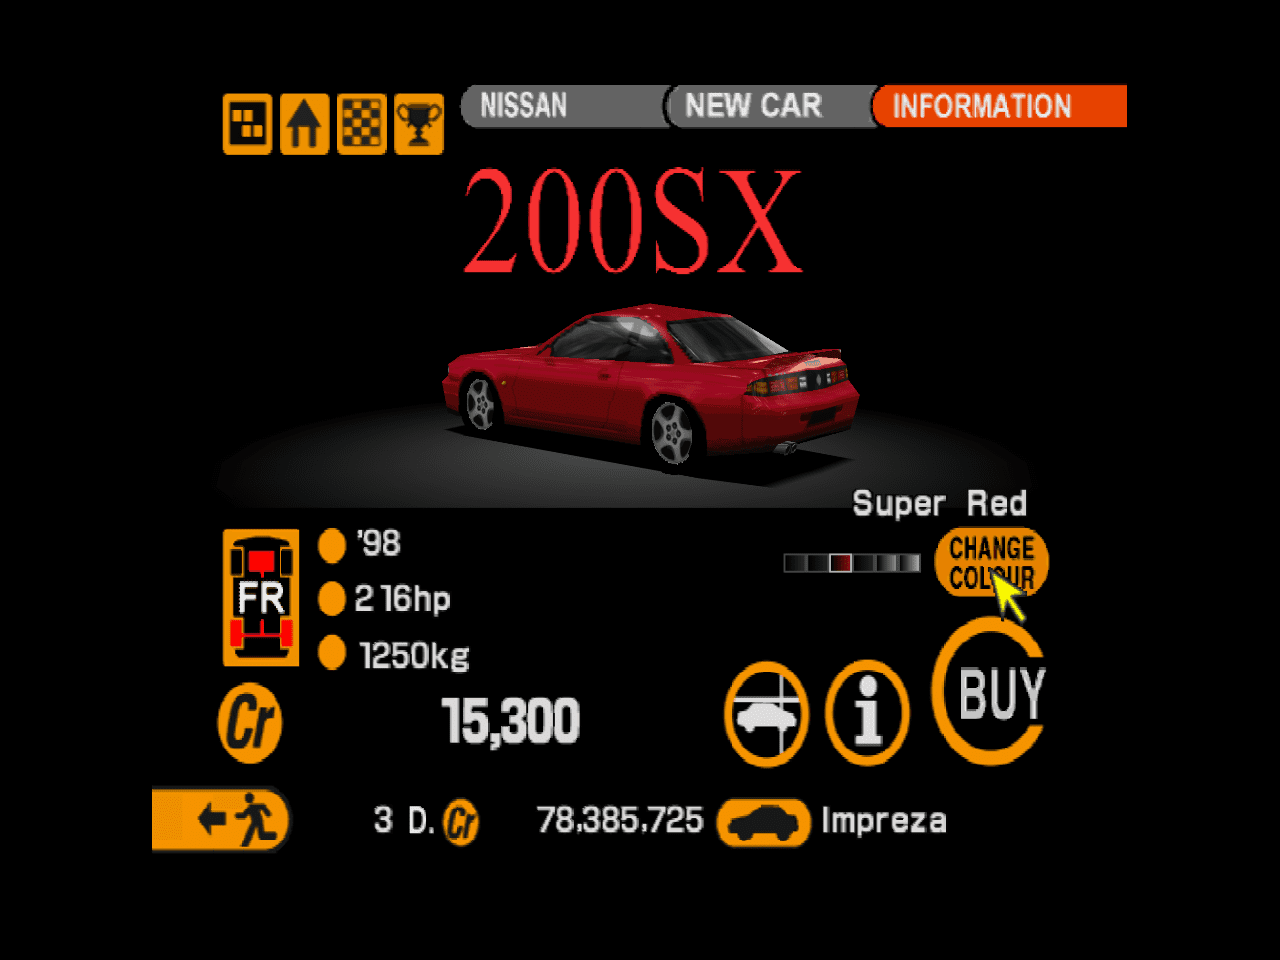 s14200sxnew.png